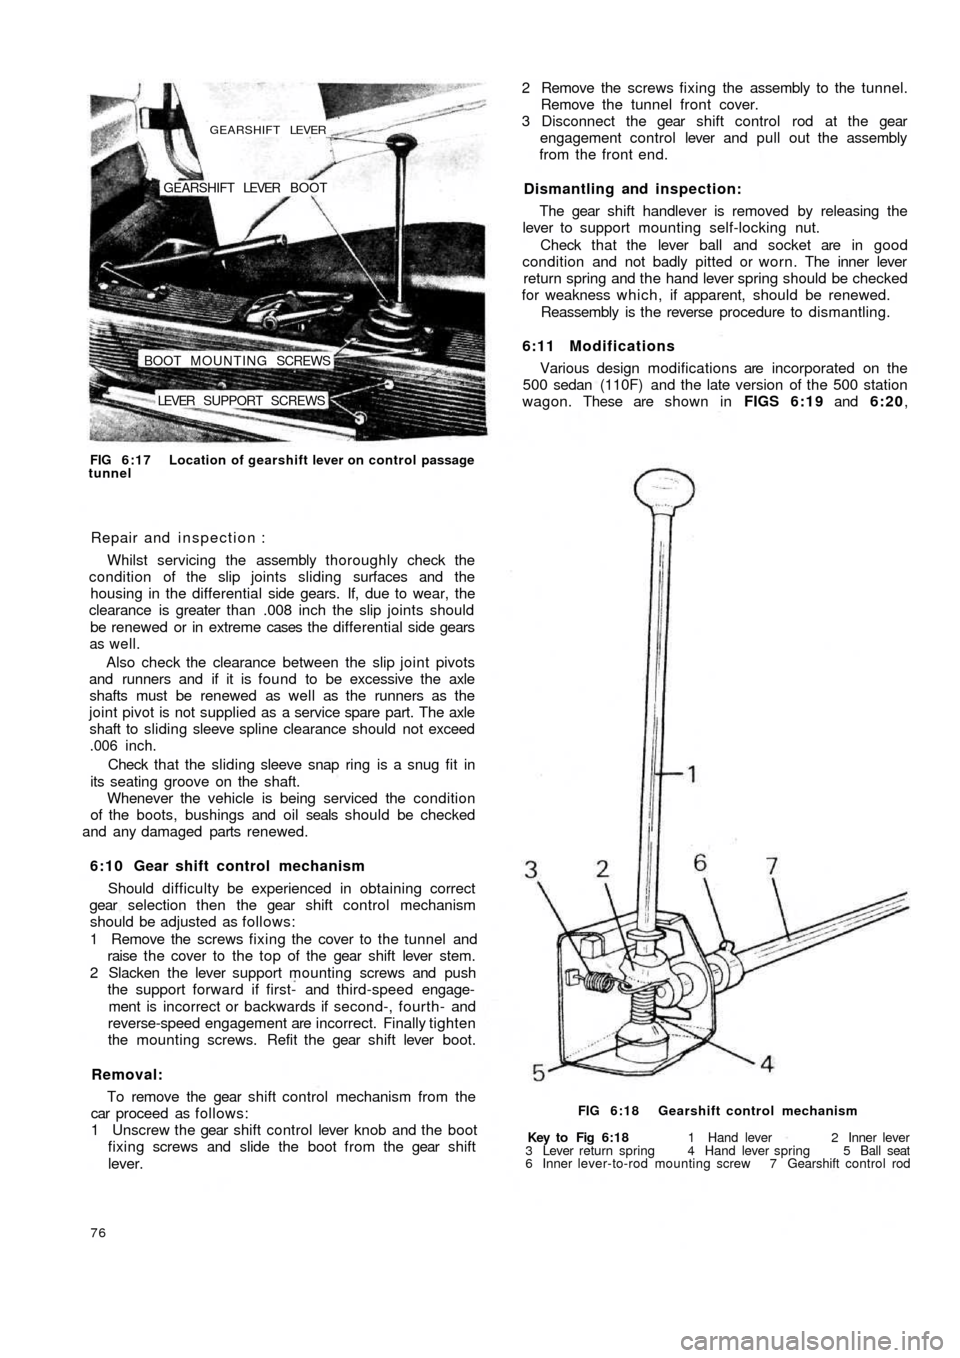 FIAT 500 1971 1.G Service Manual LEVER  SUPPORT SCREWS BOOT MOUNTING SCREWSGEARSHIFT LEVER  BOOT
GEARSHIFT LEVER
FIG 6:17 Location of gearshift lever on control  passage
tunnel
Repair and inspection :
Whilst servicing the assembly th